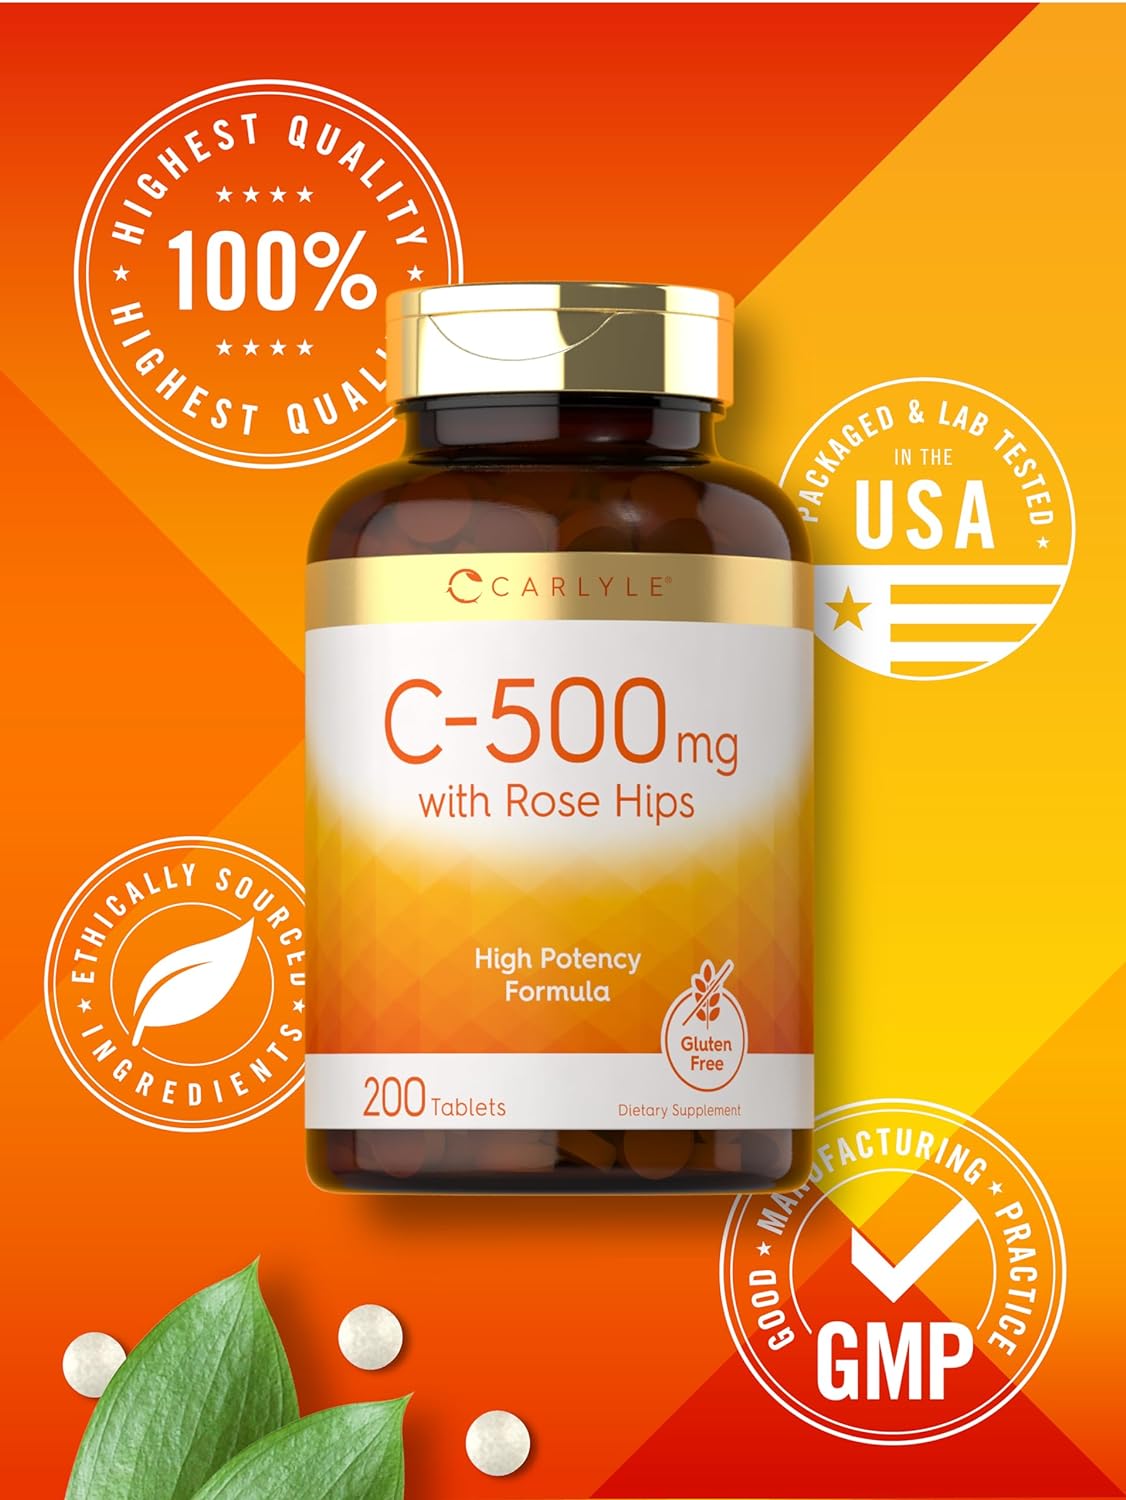 Carlyle Vitamin C with Rose HIPS 500mg | 200 Tablets | High Potency Formula | Vegetarian, Non-GMO and Gluten Free Supplement